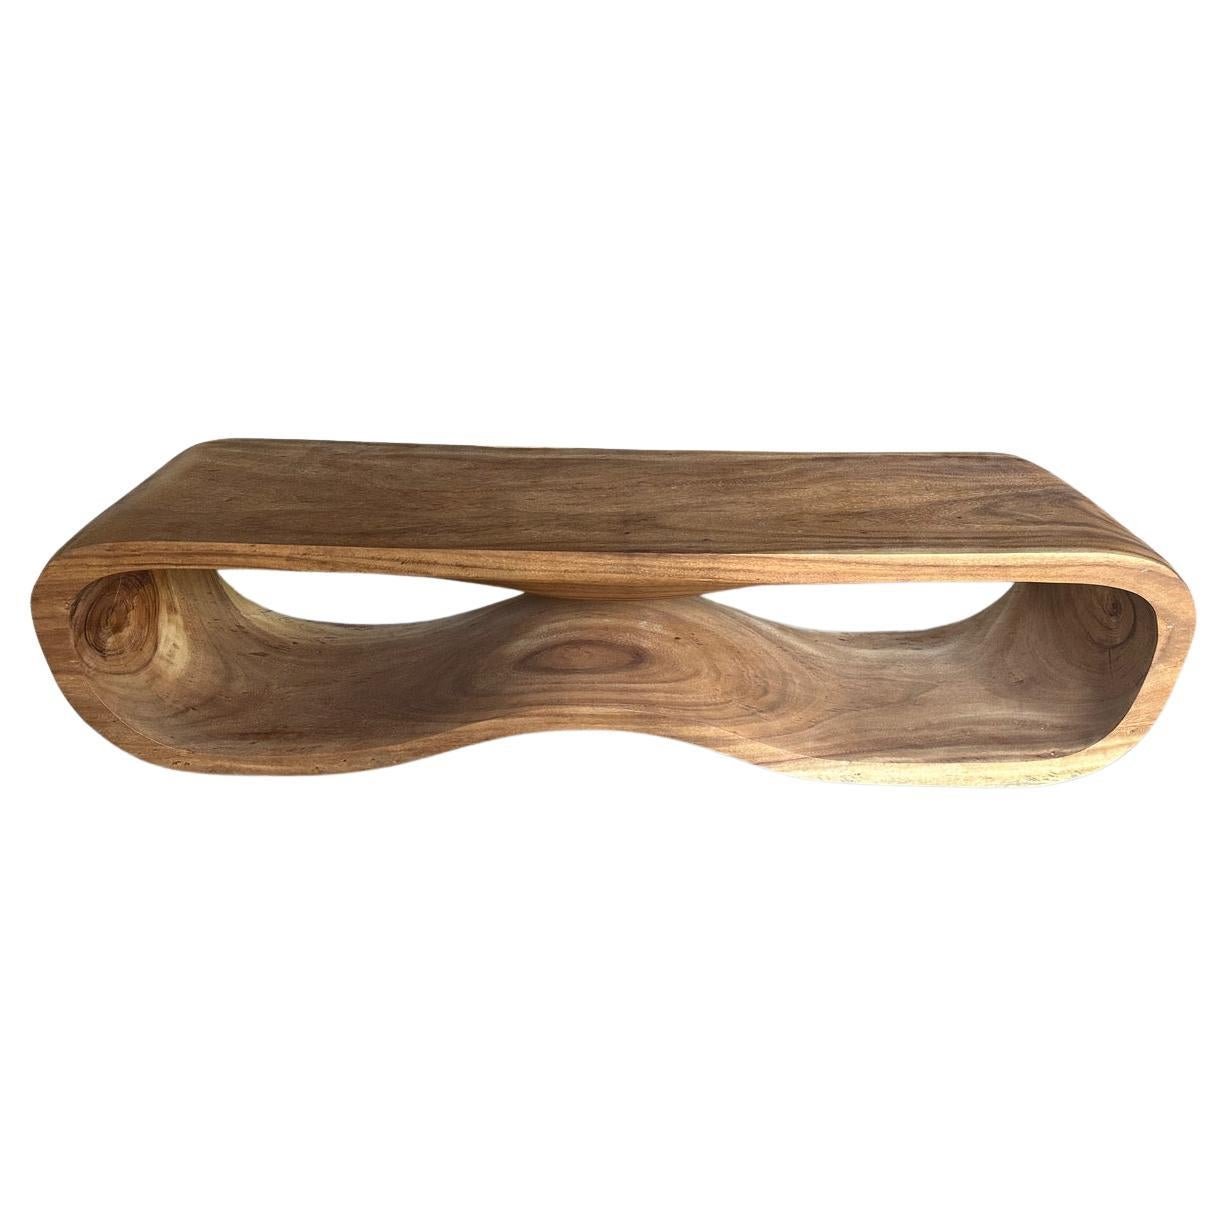 Andrianna Shamaris Minimalist Sculptural Suar Wood Bench or Coffee Table For Sale